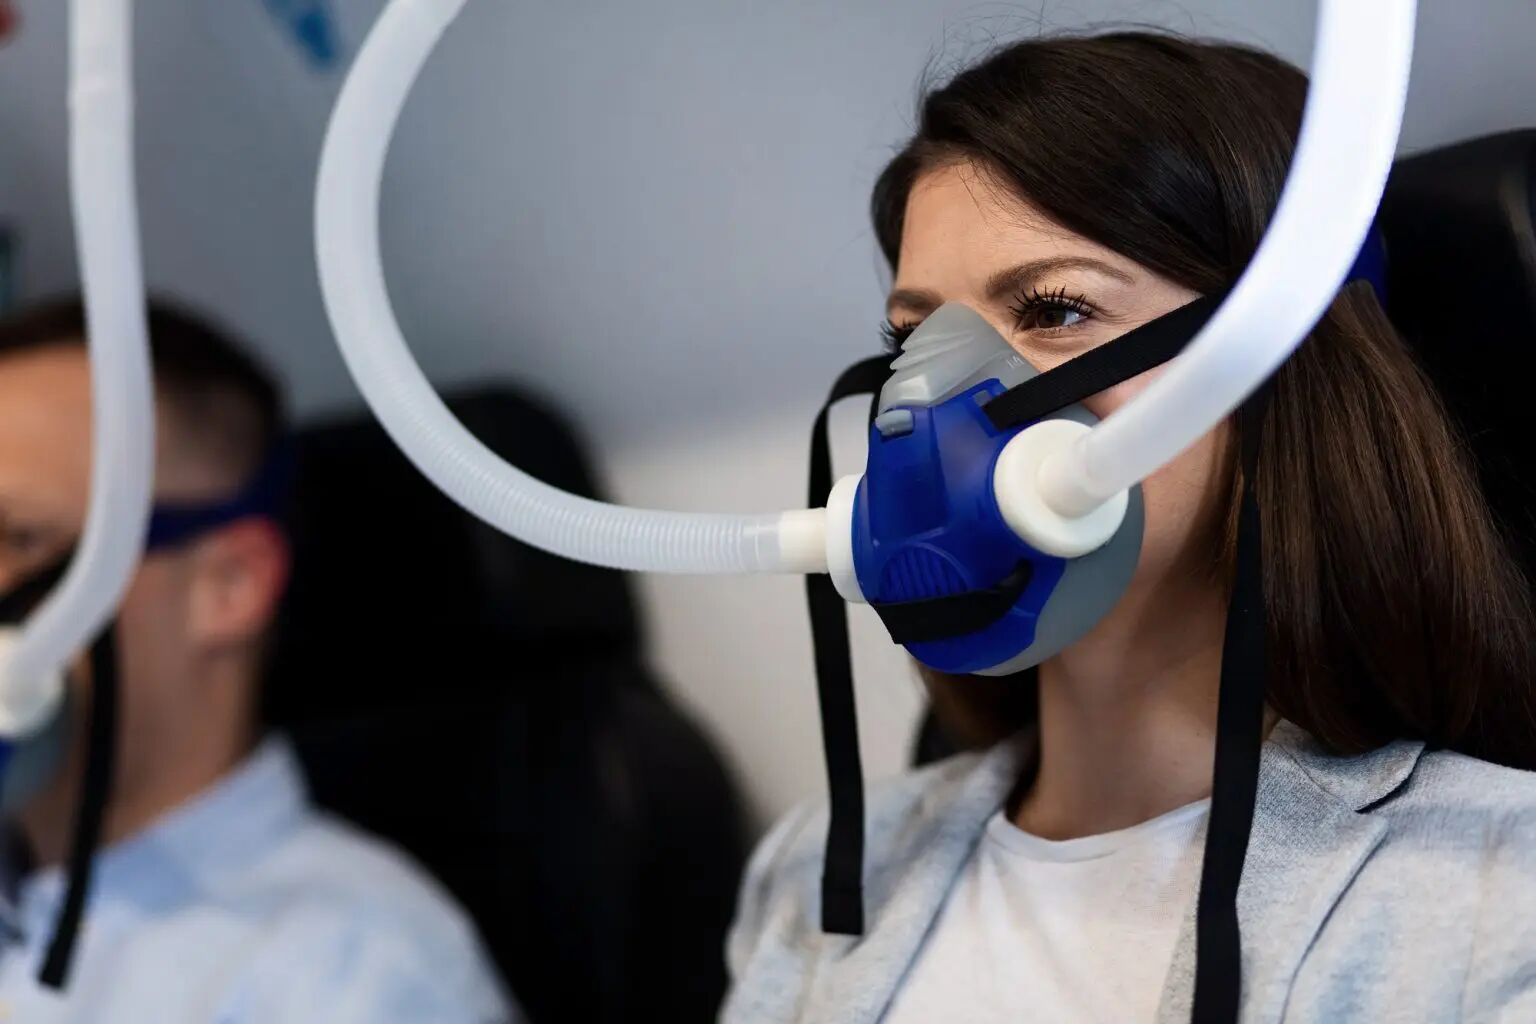 A woman is wearing an oxygen mask on a plane. Hbot have 14 conditions that are FDA approved 